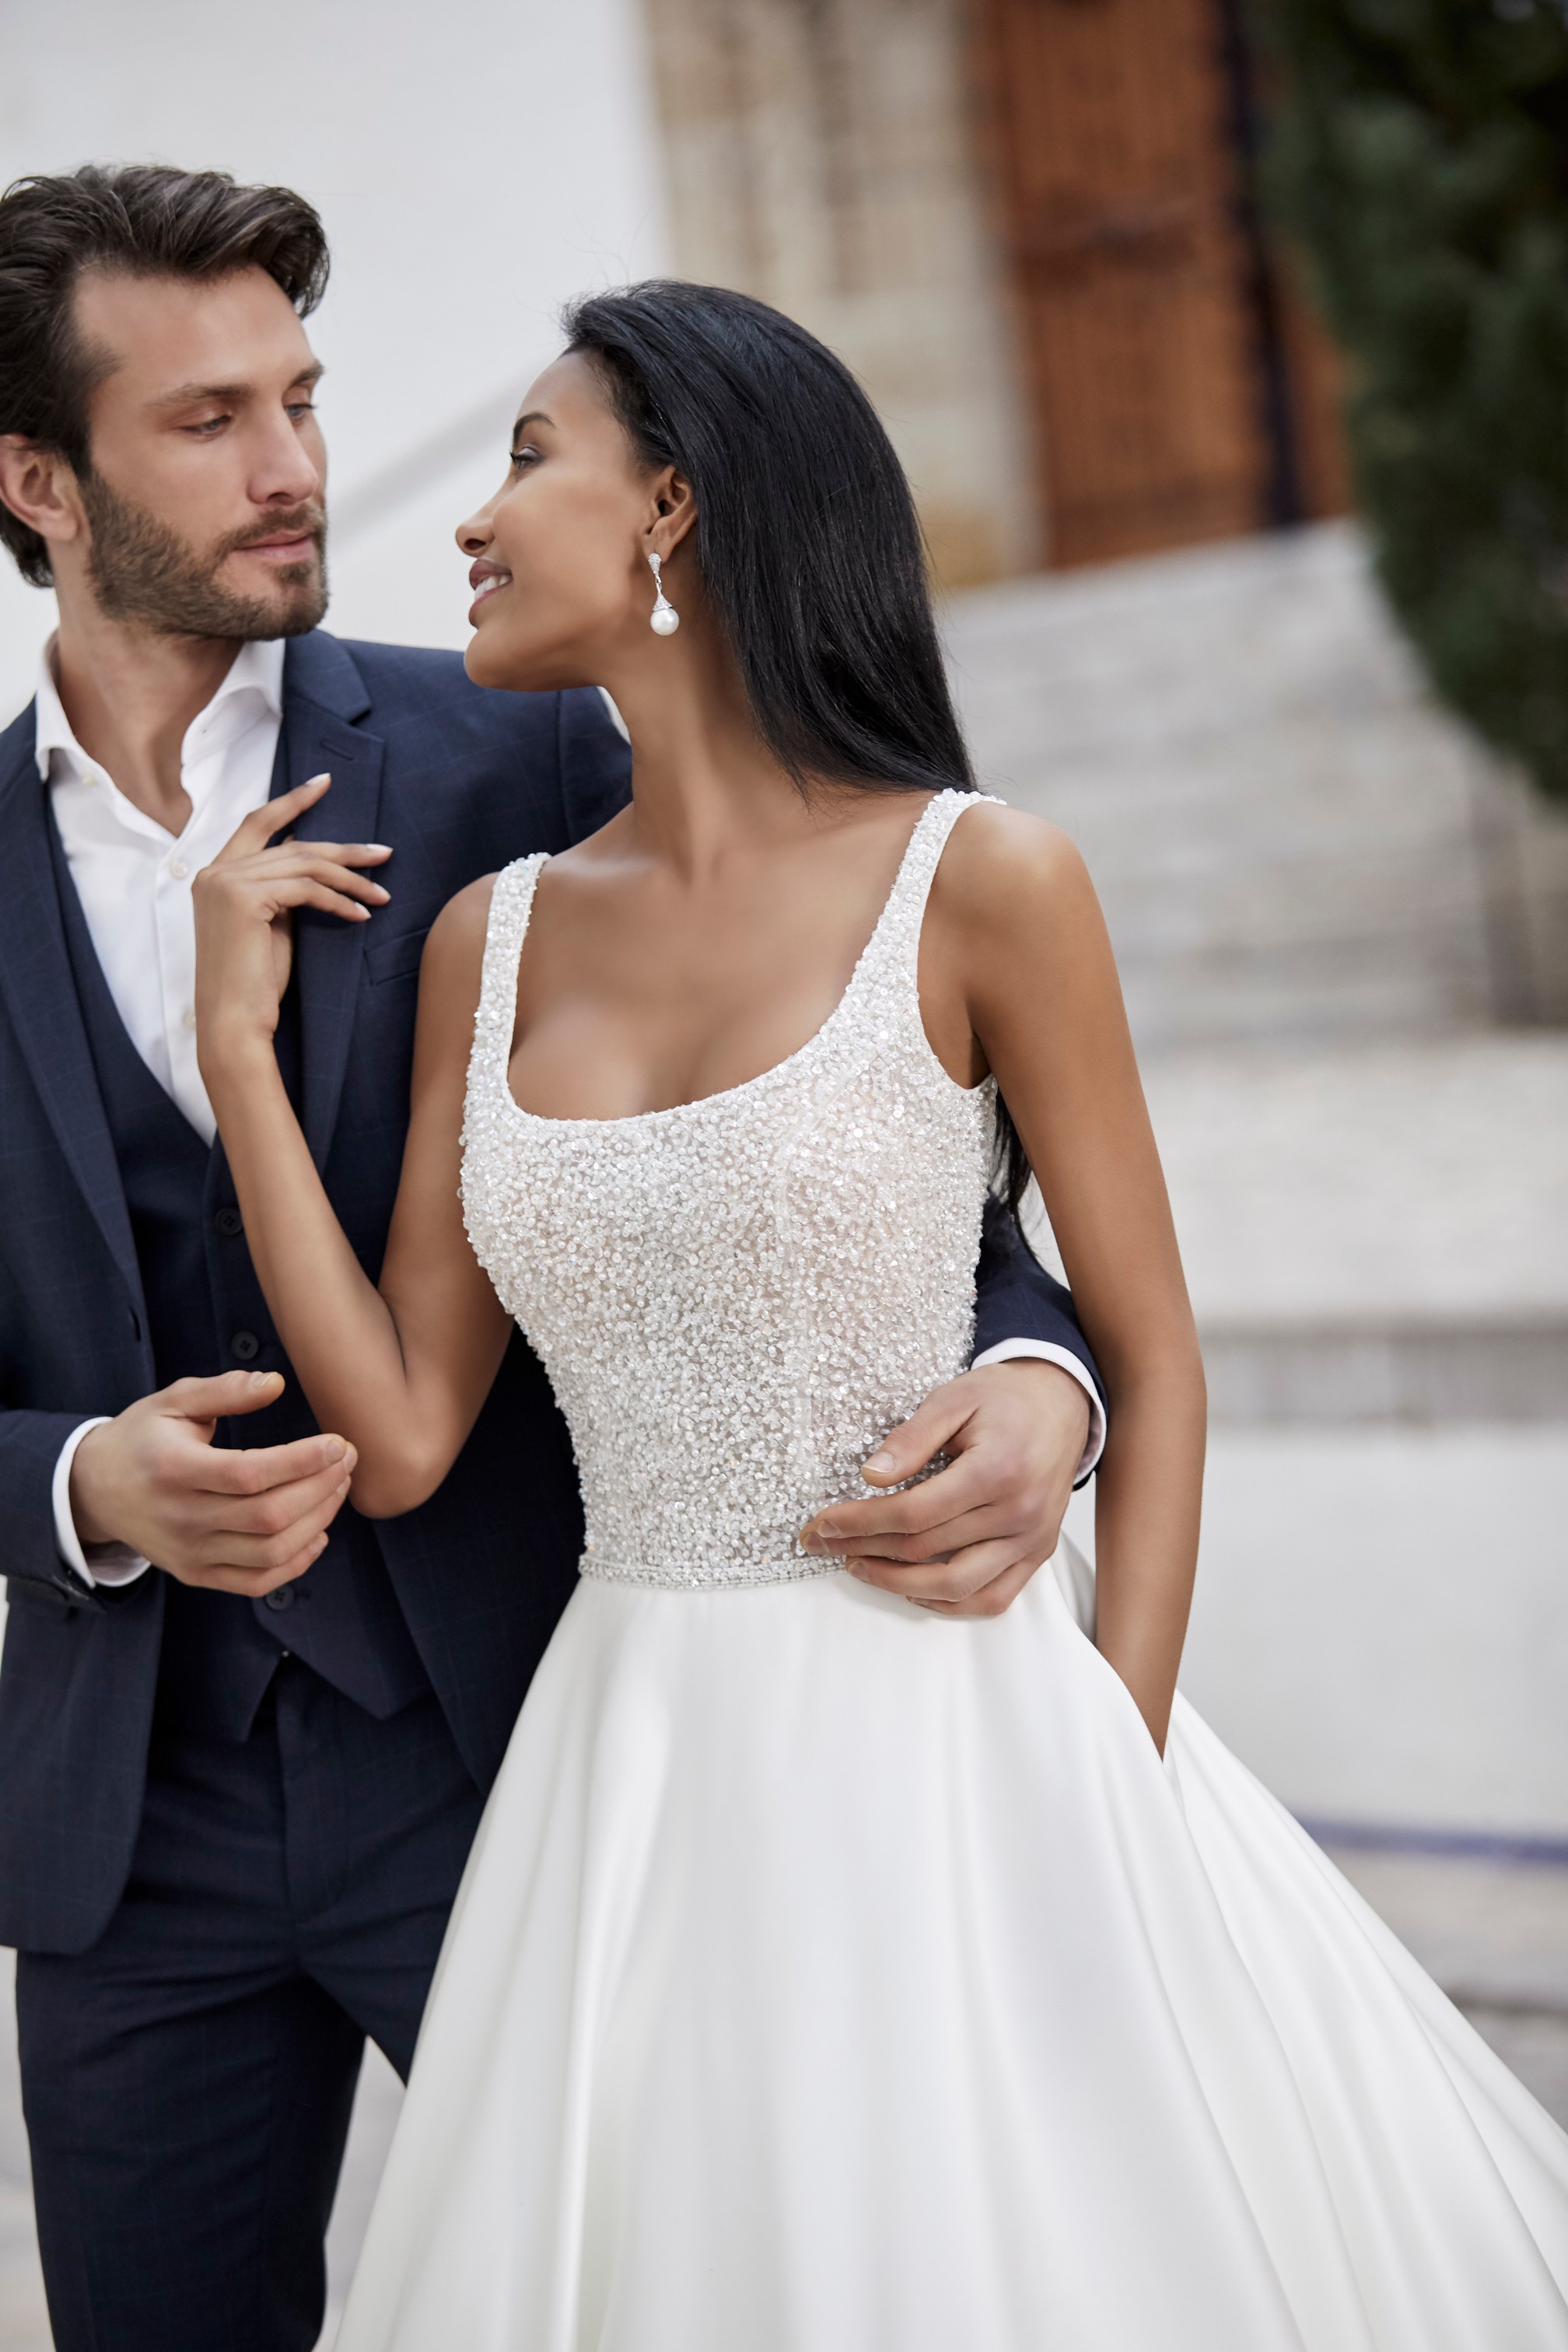 Man and woman embracing on wedding day while woman wears strappy ballgown wedding dress with beaded bodice